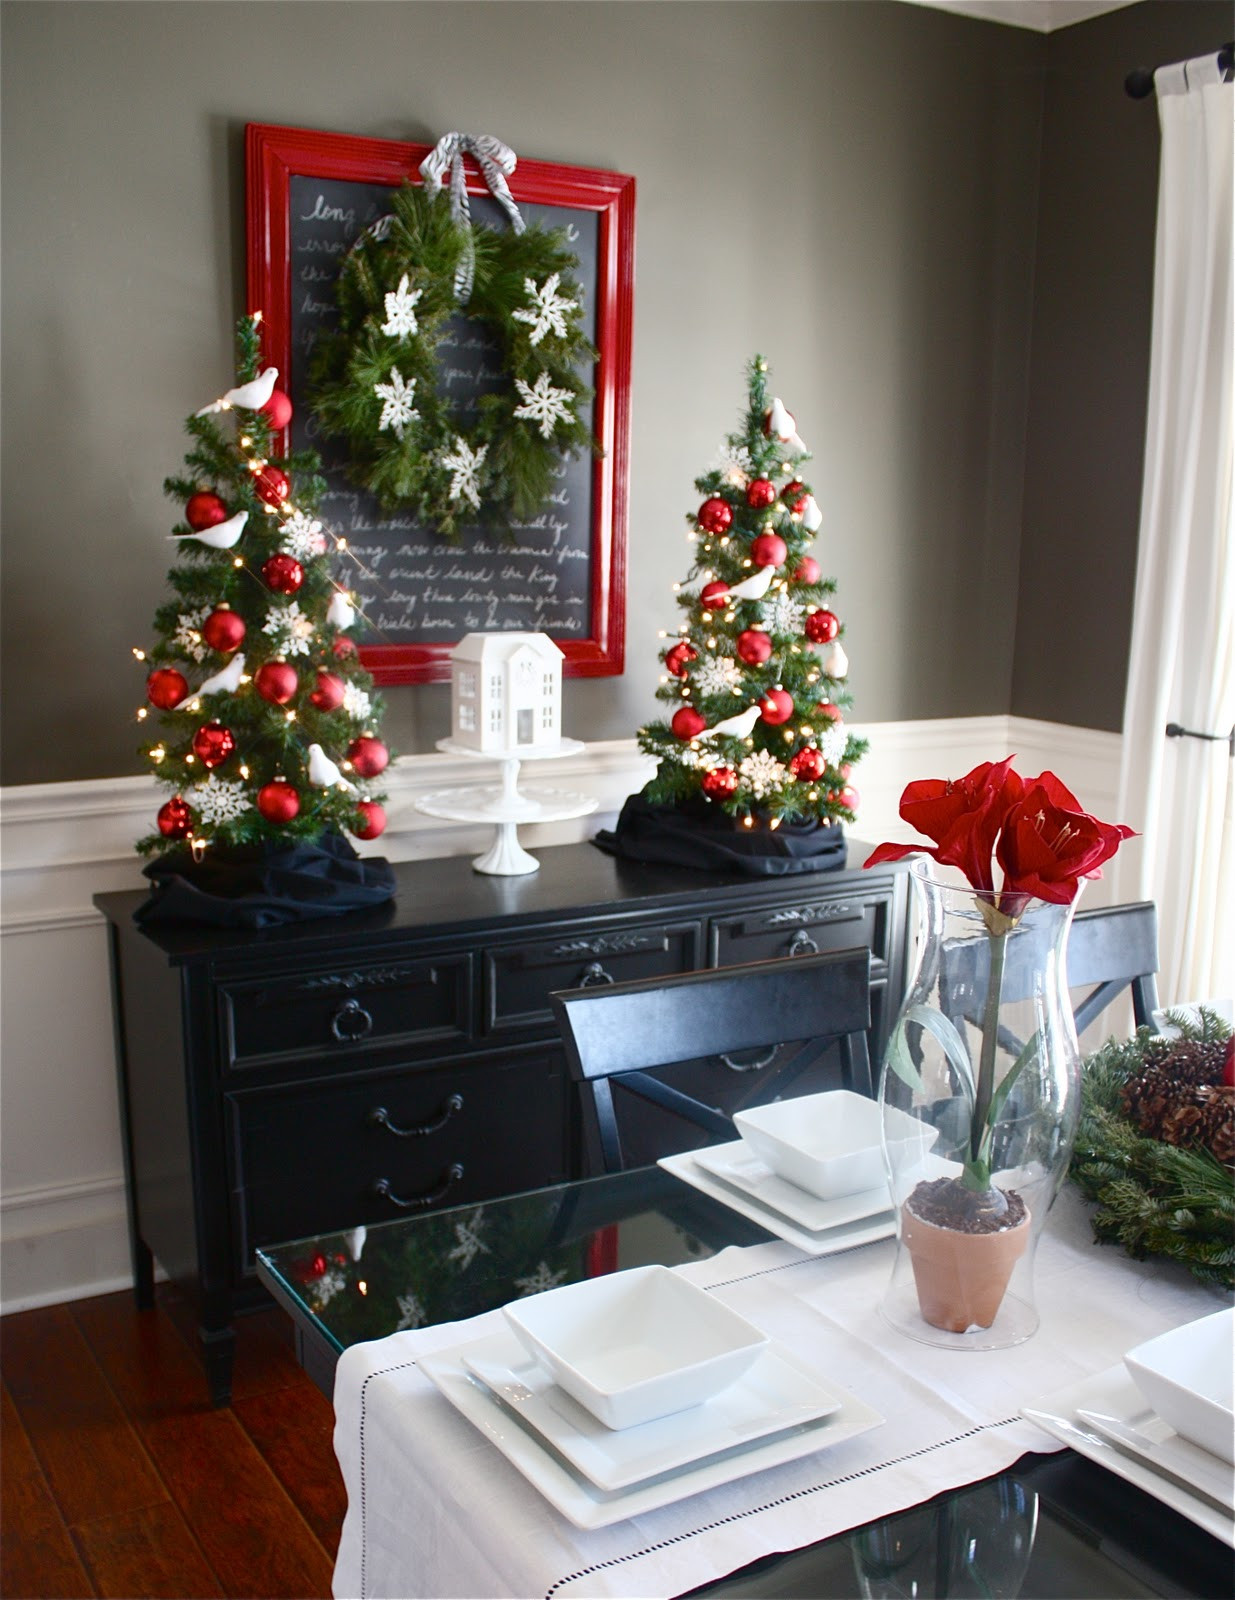 Dining Room Christmas Decorating
 The Yellow Cape Cod Holiday Home Series Christmas Dining